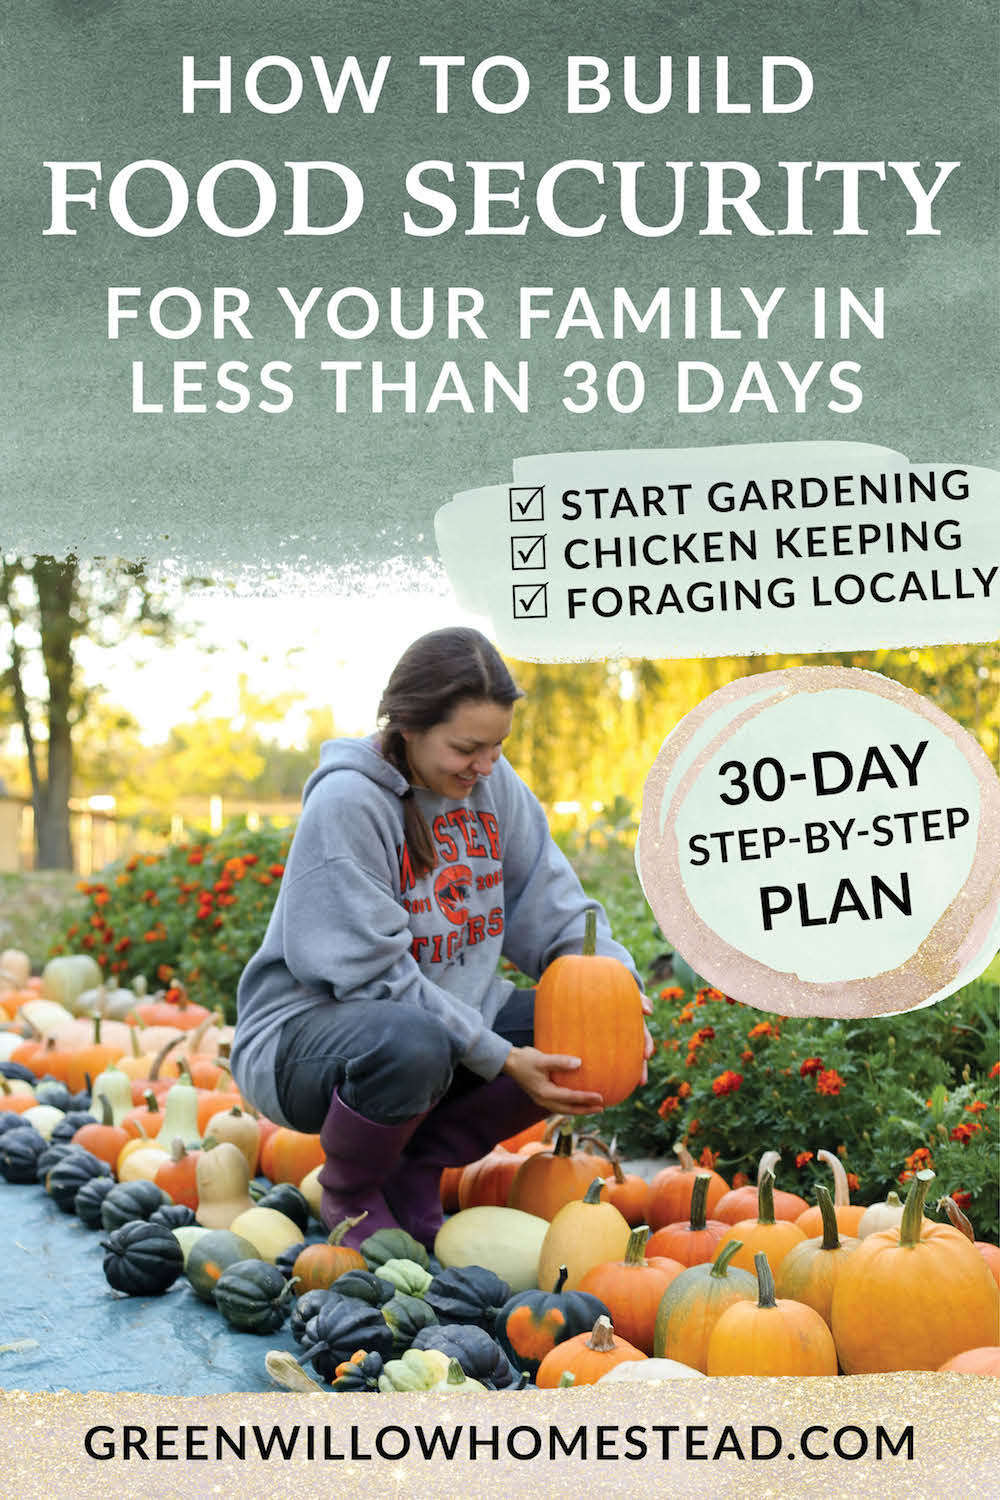 How to build food security for your family in less than 30 days